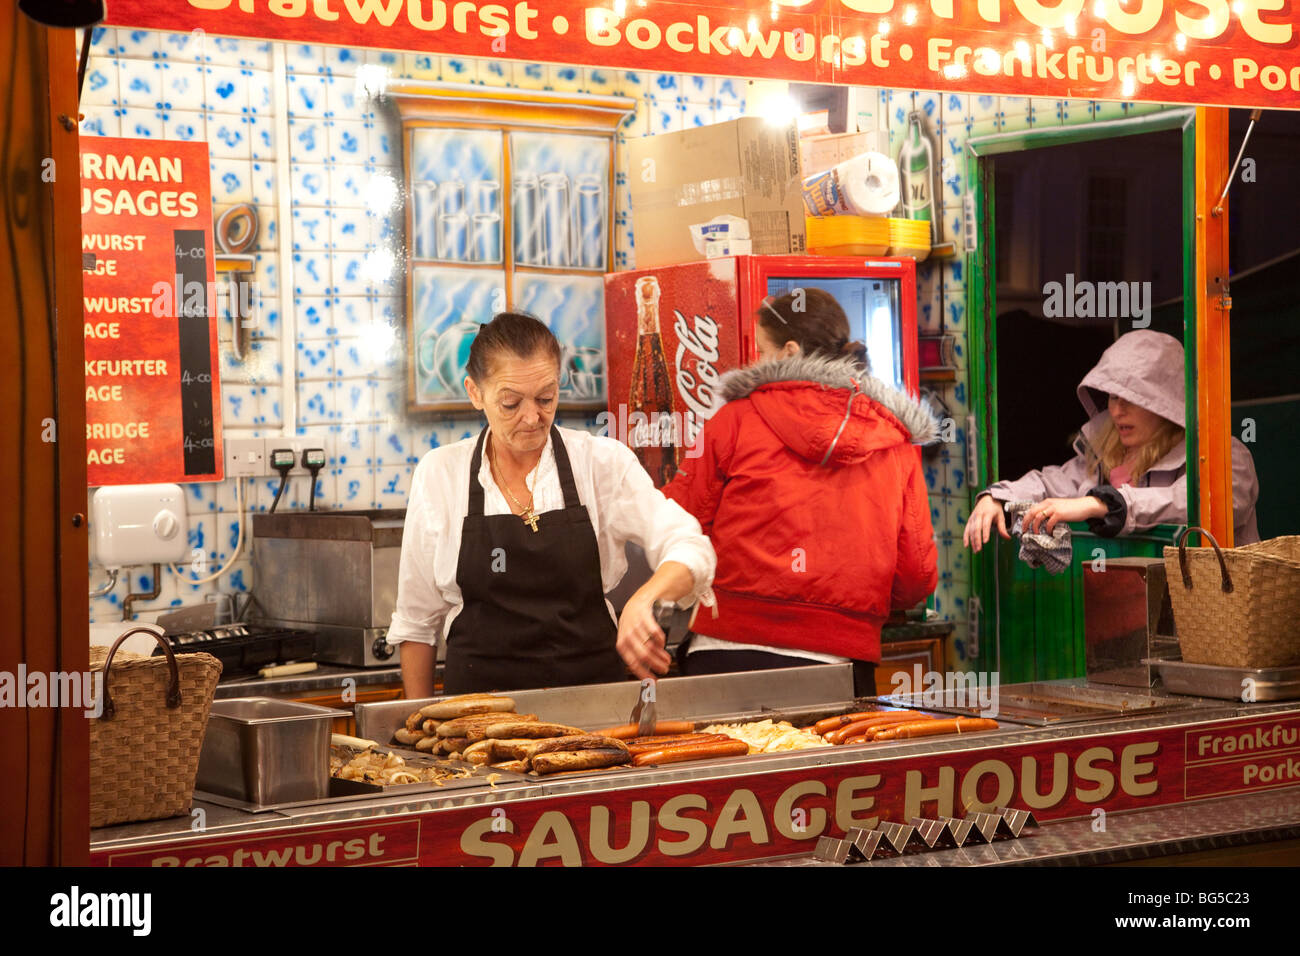 fast food stall serving hot food Stock Photo